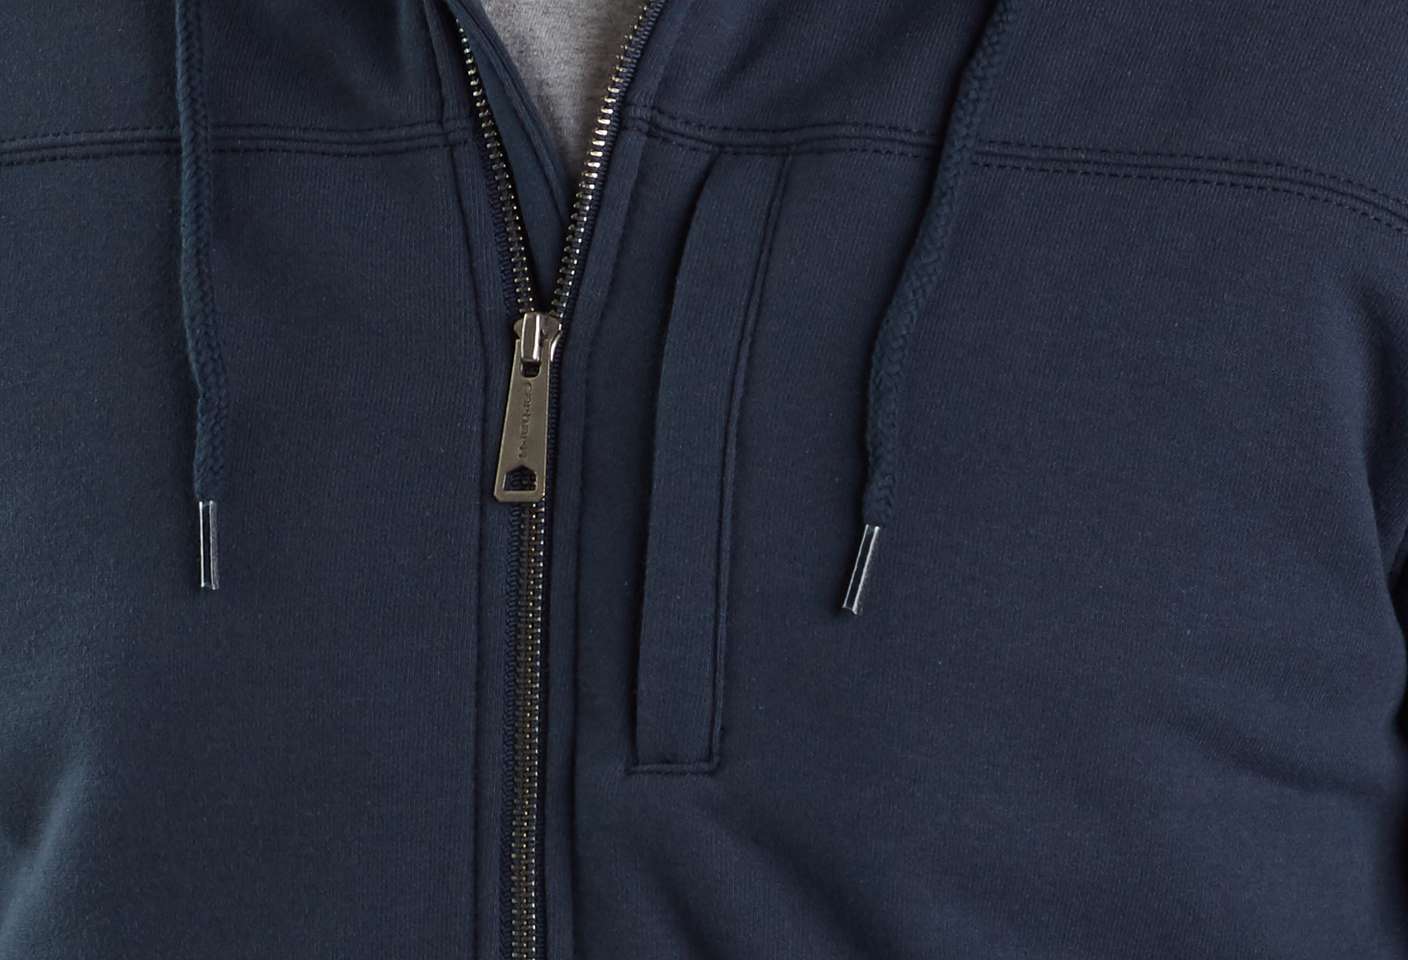 Chest map-pocket with zip closure secures your gear